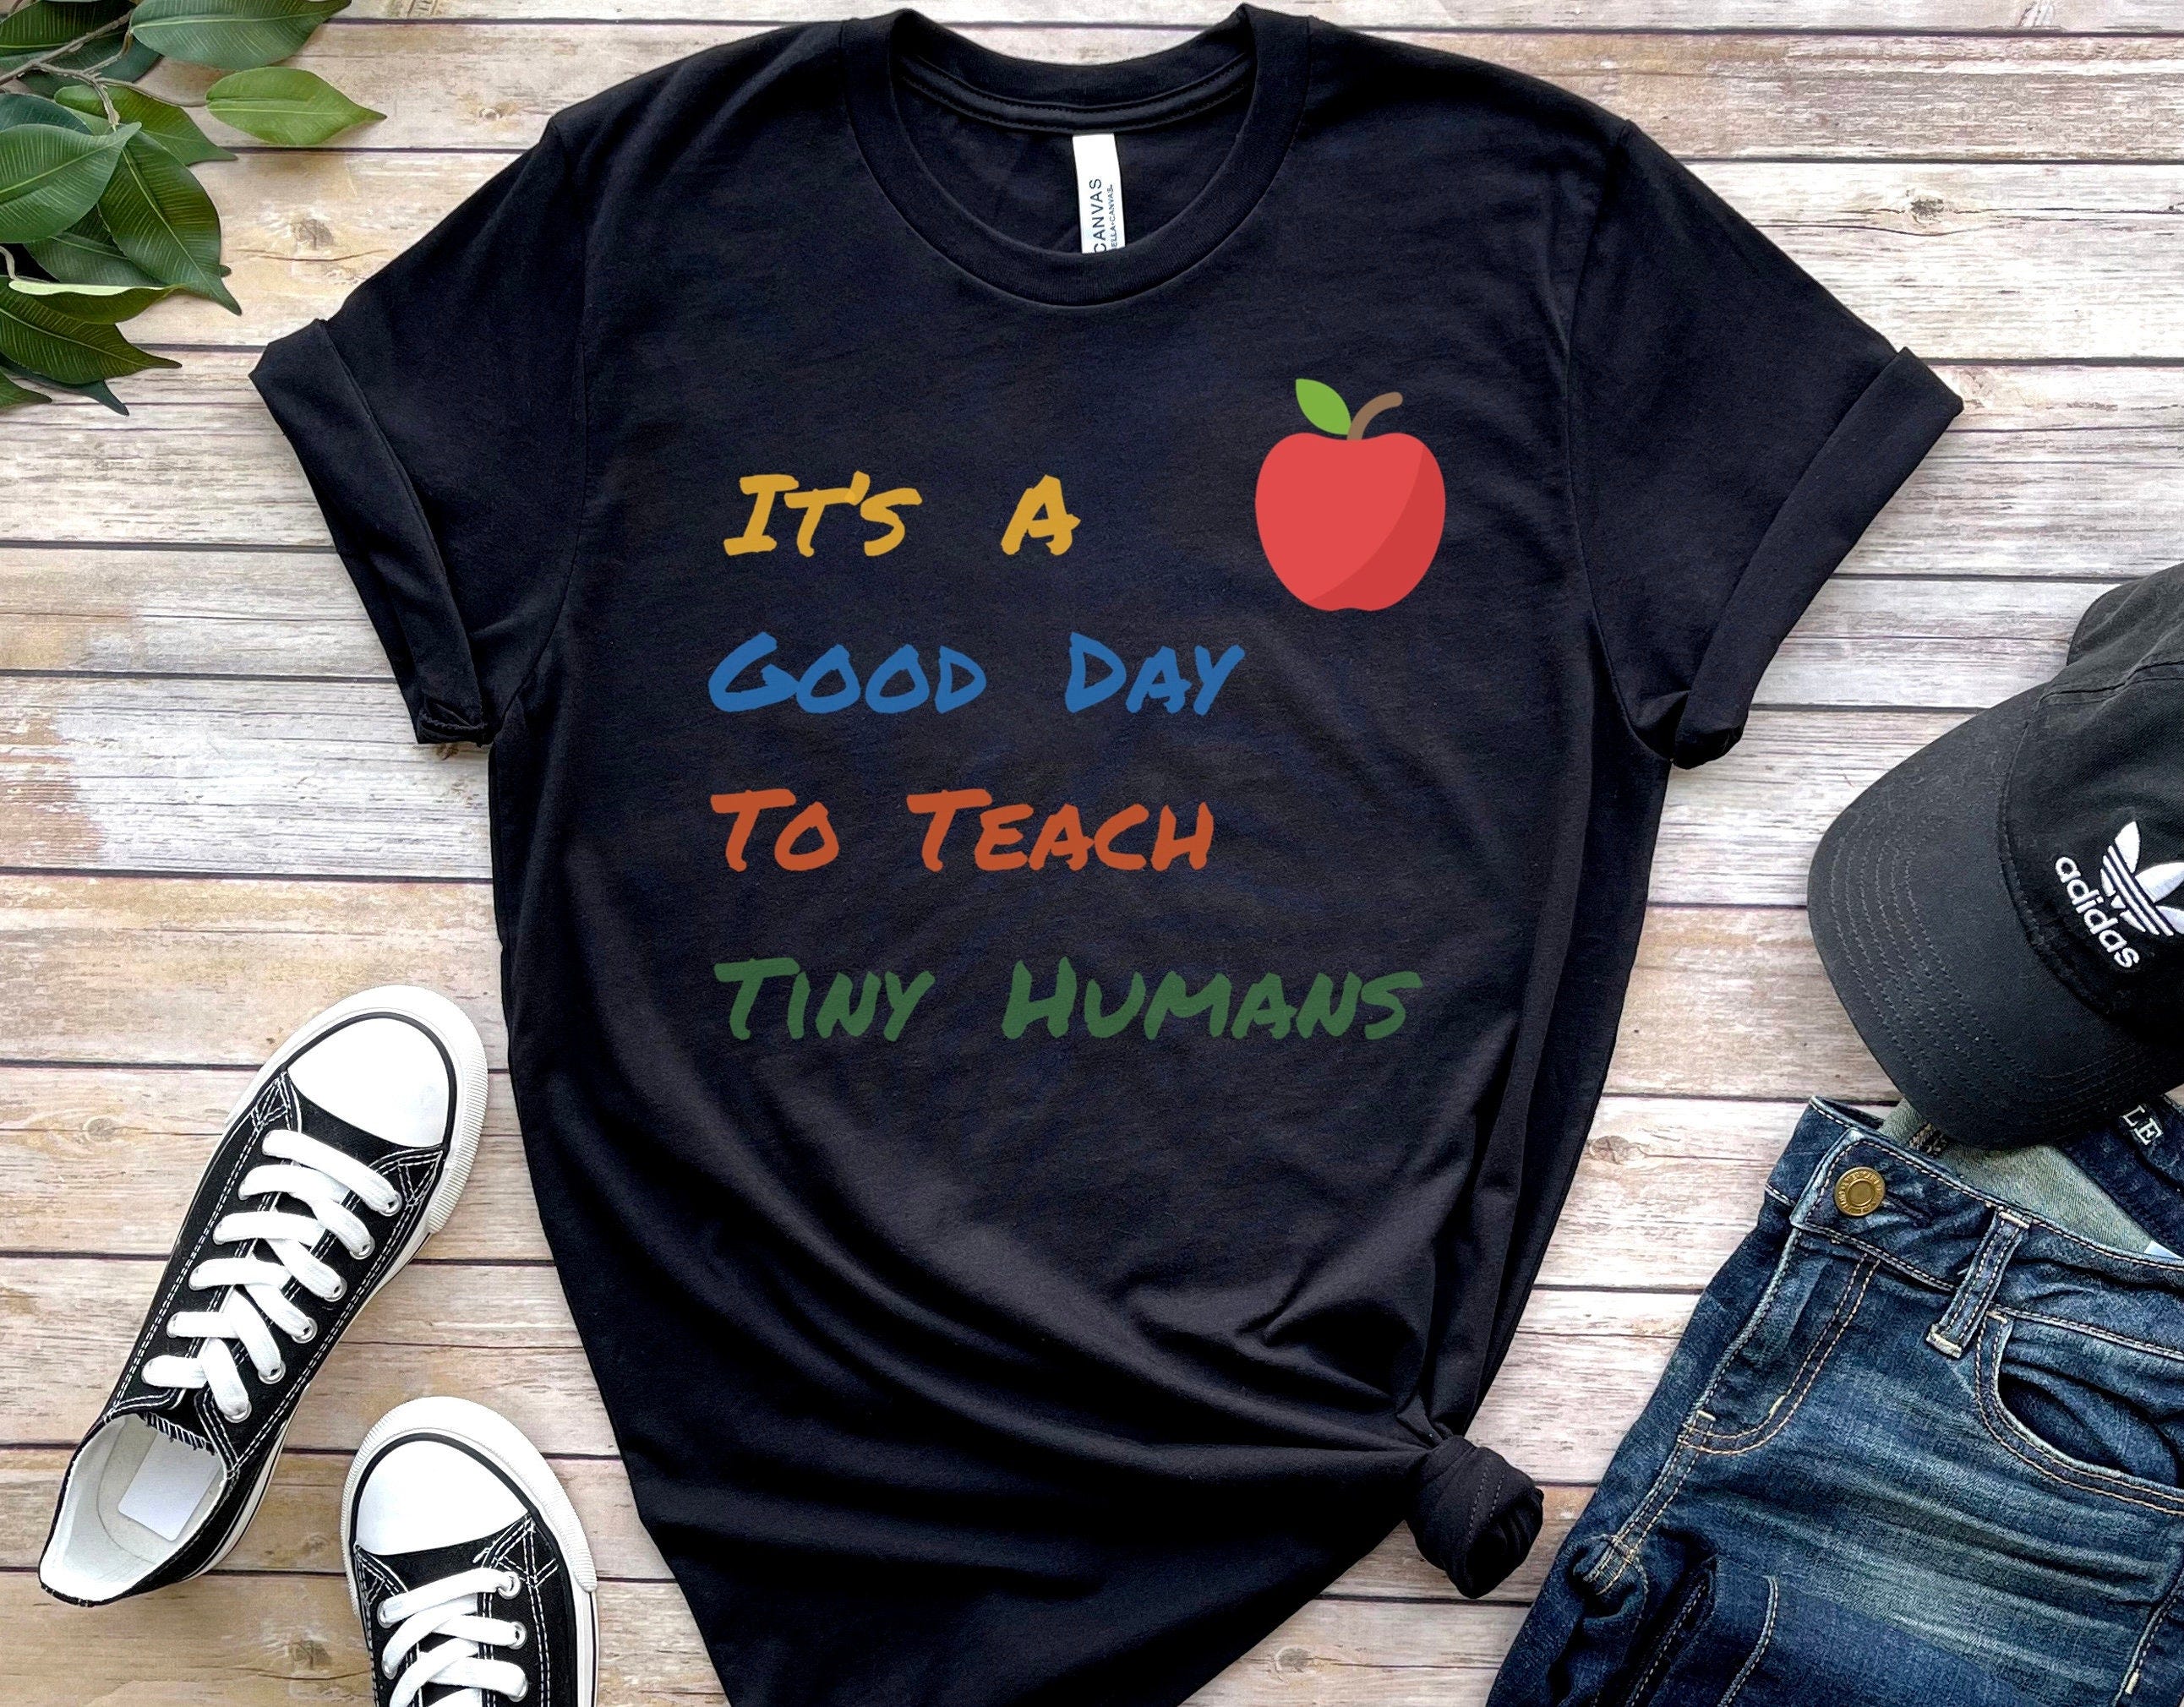 It’s A Good Day To Teach Tiny Humans Shirt, Preschool Teacher Shirt, Back to School Shirt, Teacher Gift Shirt, Teacher T-Shirt, Teacher Tee